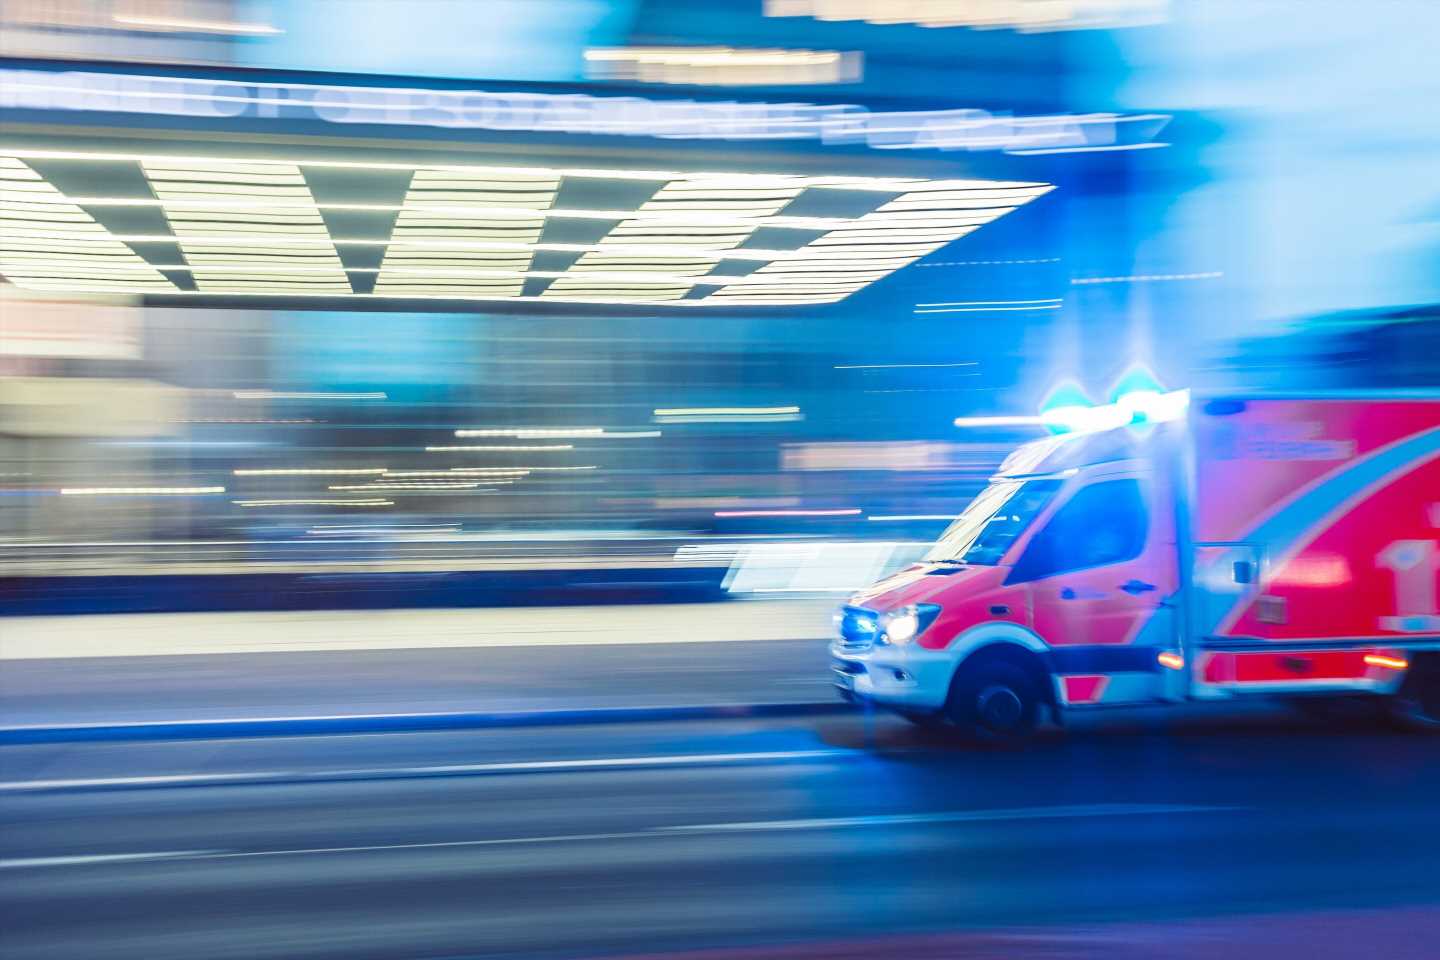 New research shows EMS workers’ anger levels rise when sleep quality falls